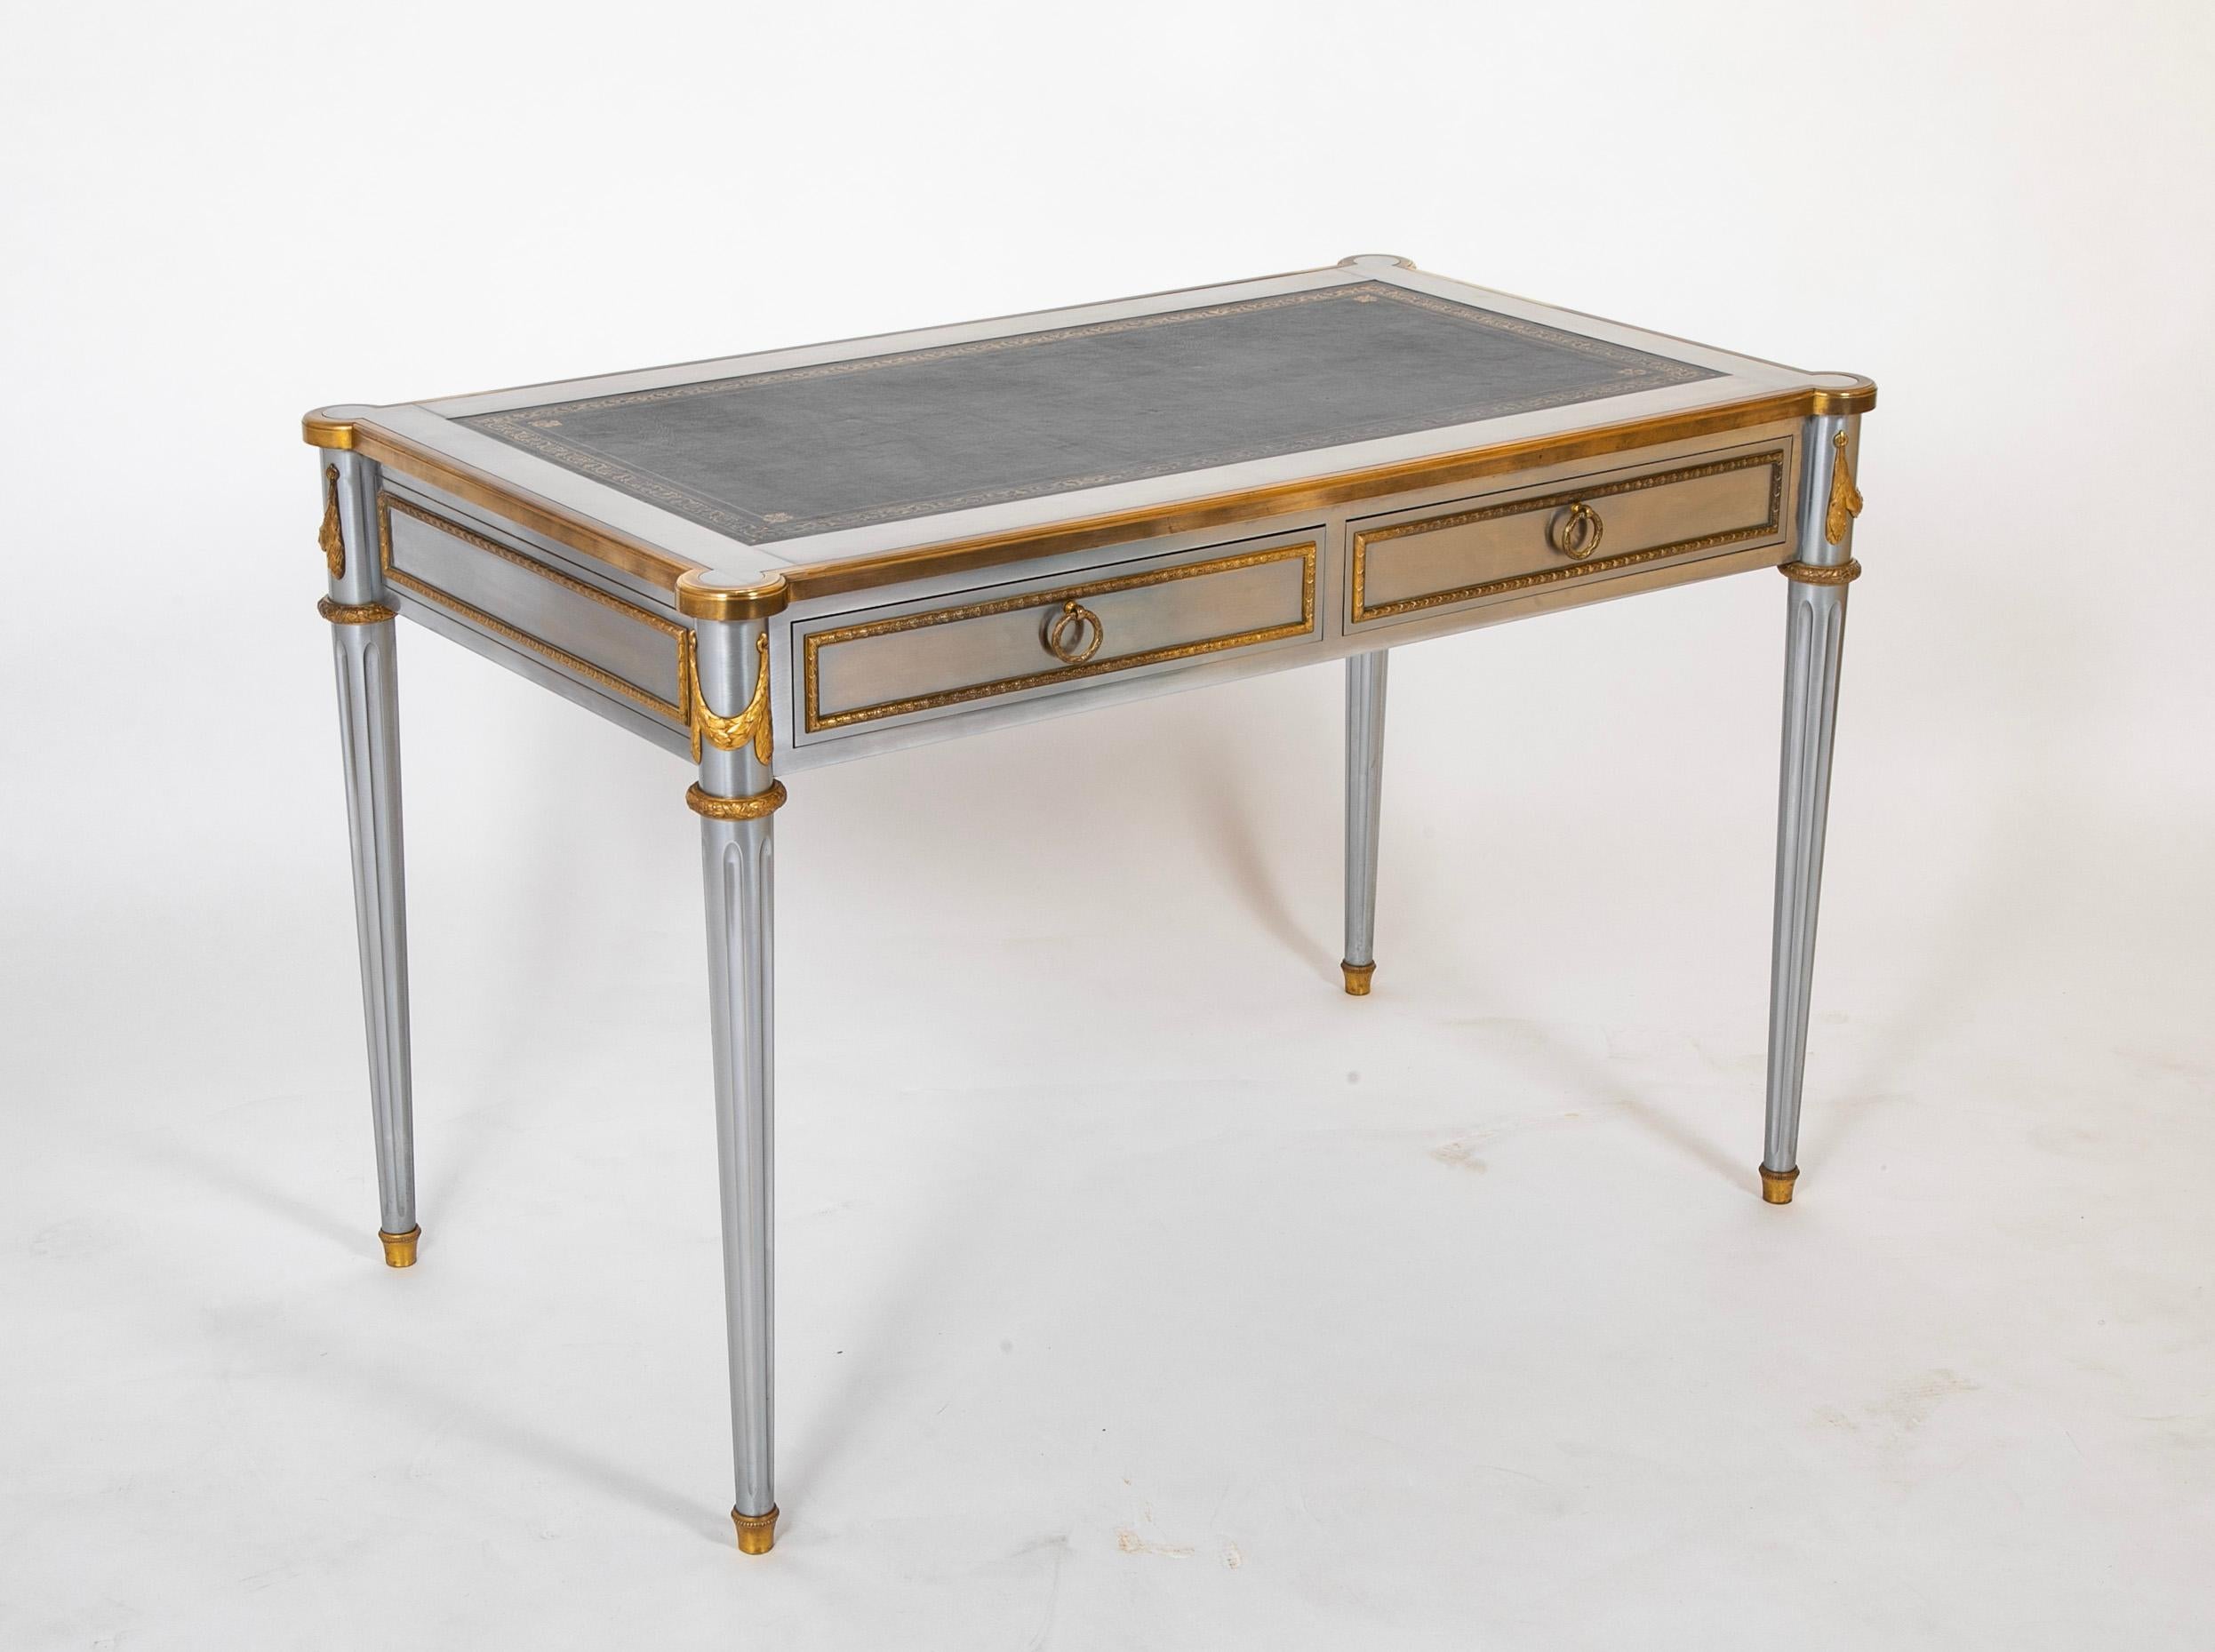    Extraordinary mid-century modern stainless steel and bronze writing table, desk, or bureau plat designed by John Vesey (American 1924-1992). Made in the grand neoclassical French Louis XVI taste featuring polished gilt bronze trim and an iconic